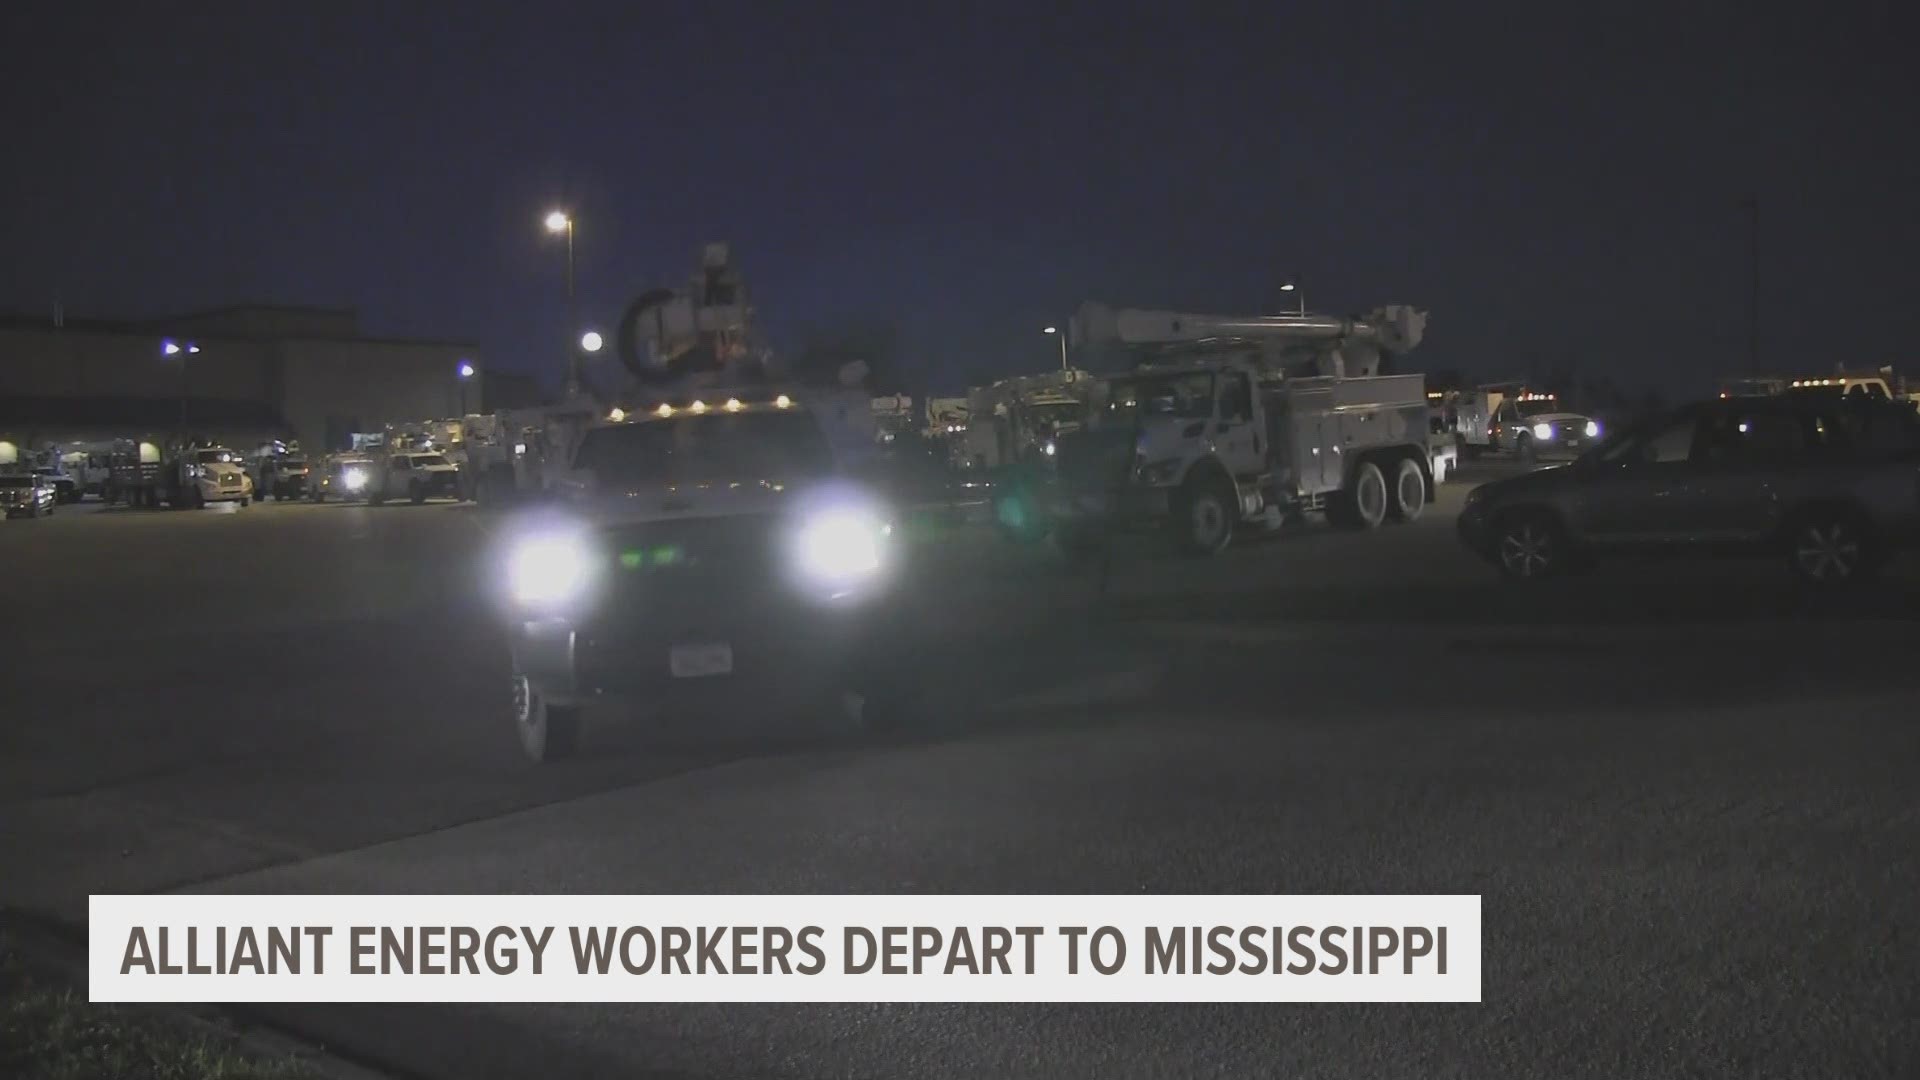 More than 200 Alliant Energy lineworkers are going to Gulfport, Miss. to help several other crews get the lights back on after the hurricane made landfall.